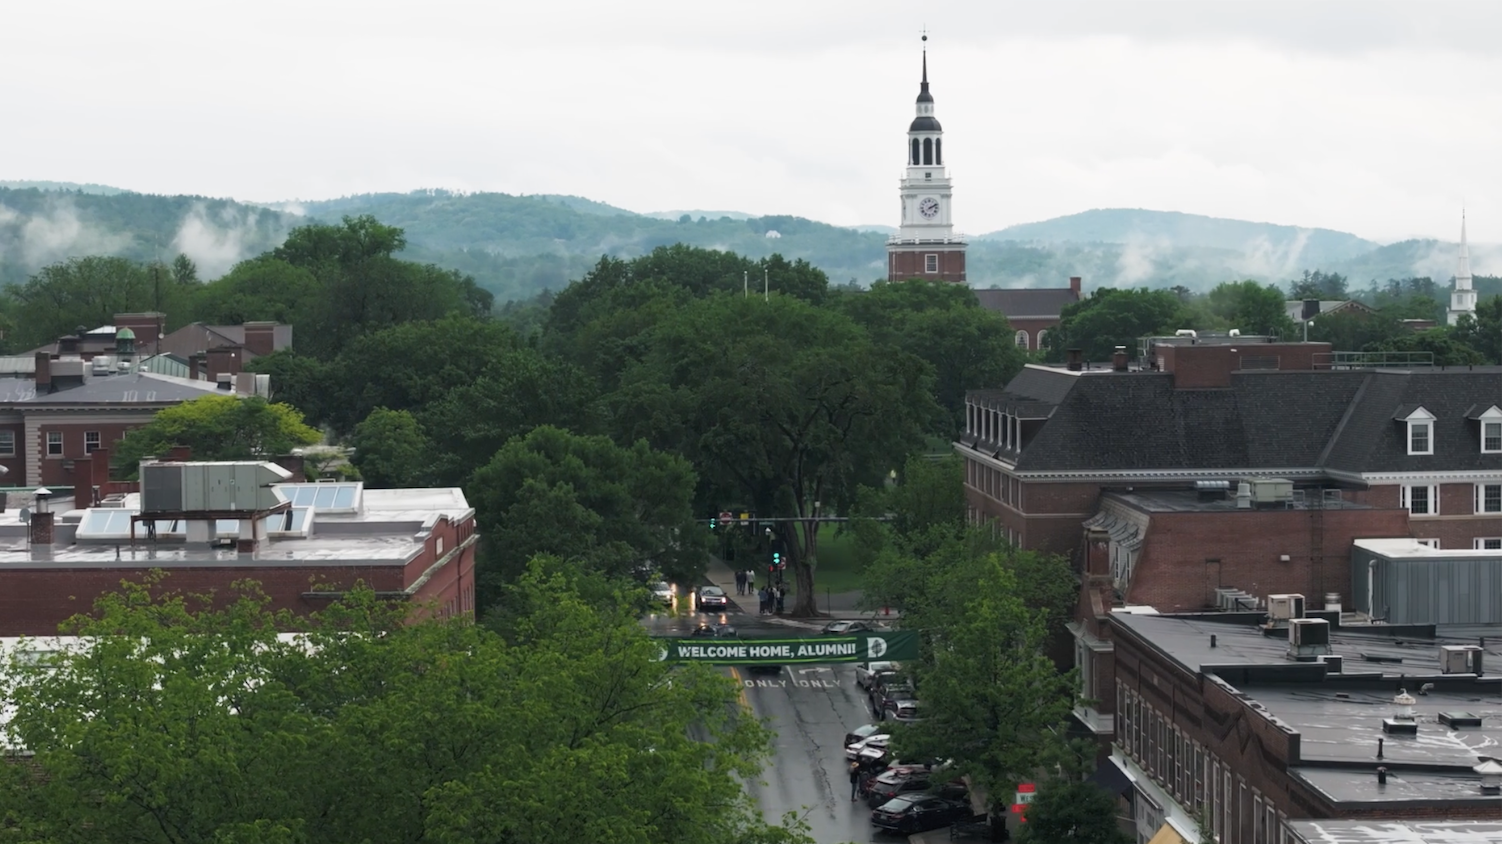 Aerial shot of Main St. - Welcome Home Alumni banner & Baker Tower